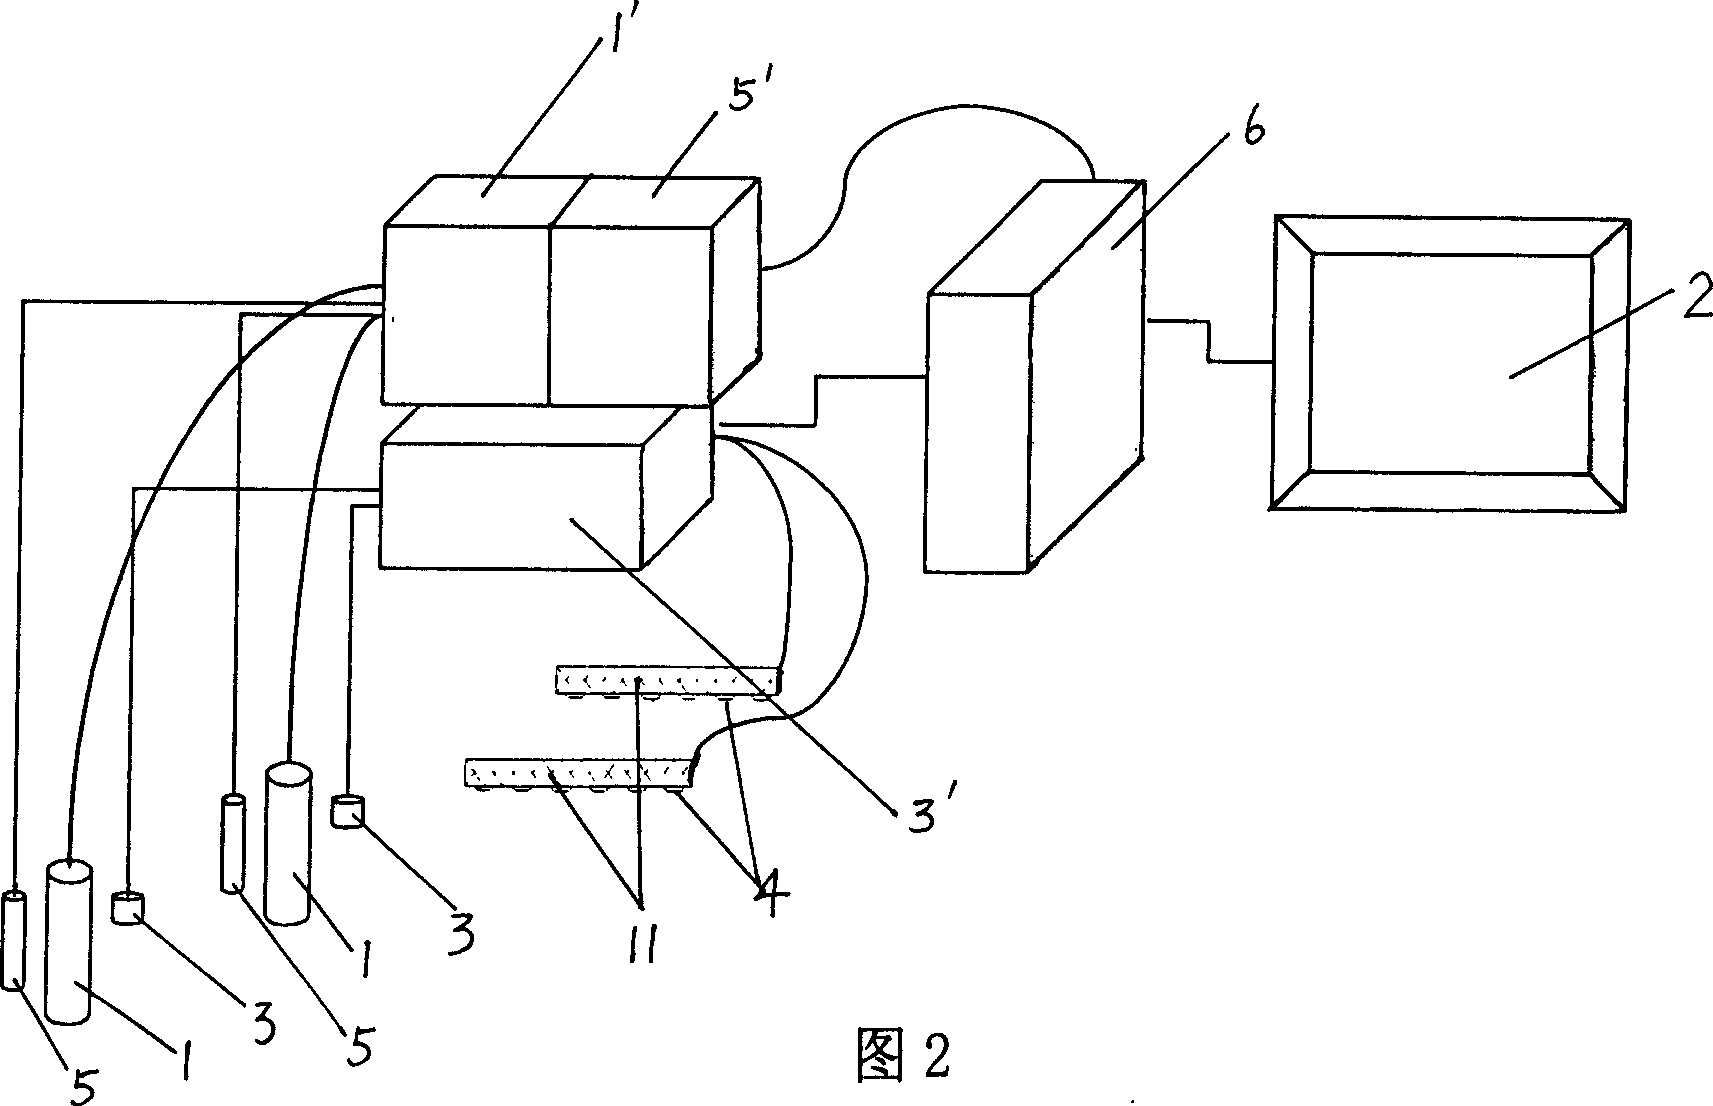 Automatic underwater object positioning method and system